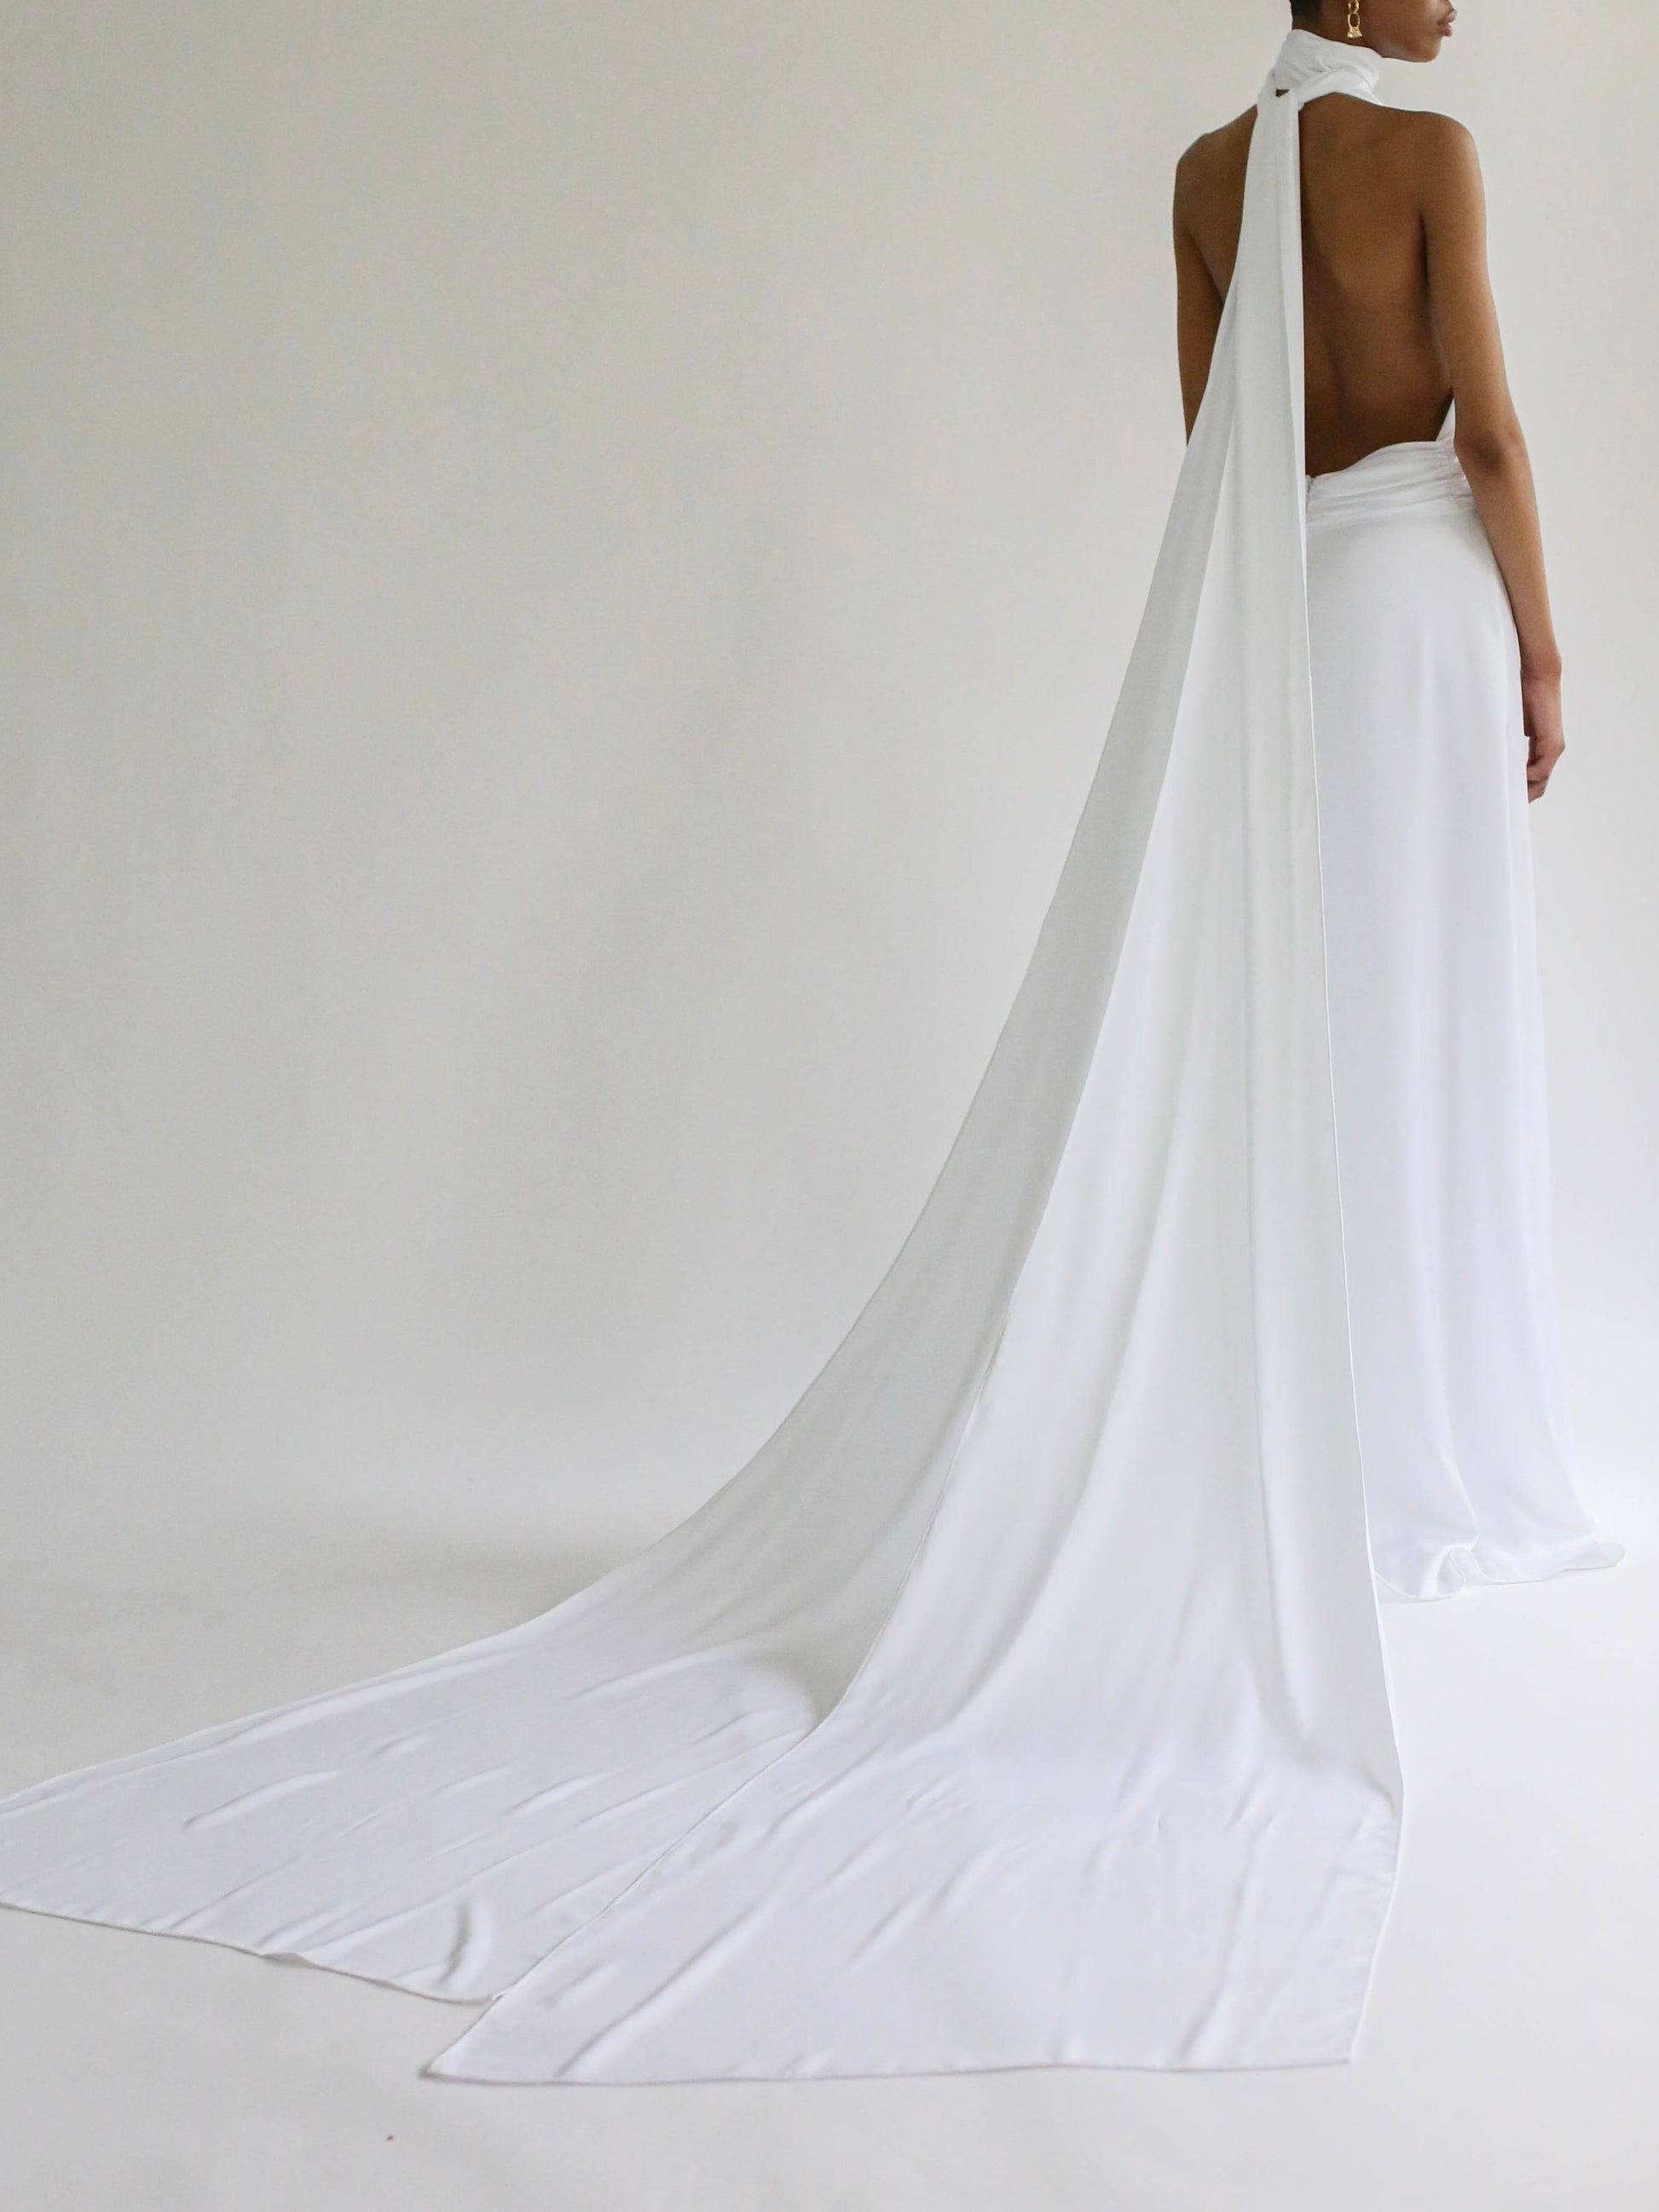 A view of the back of the Danielle Halter Neck Wedding Dress